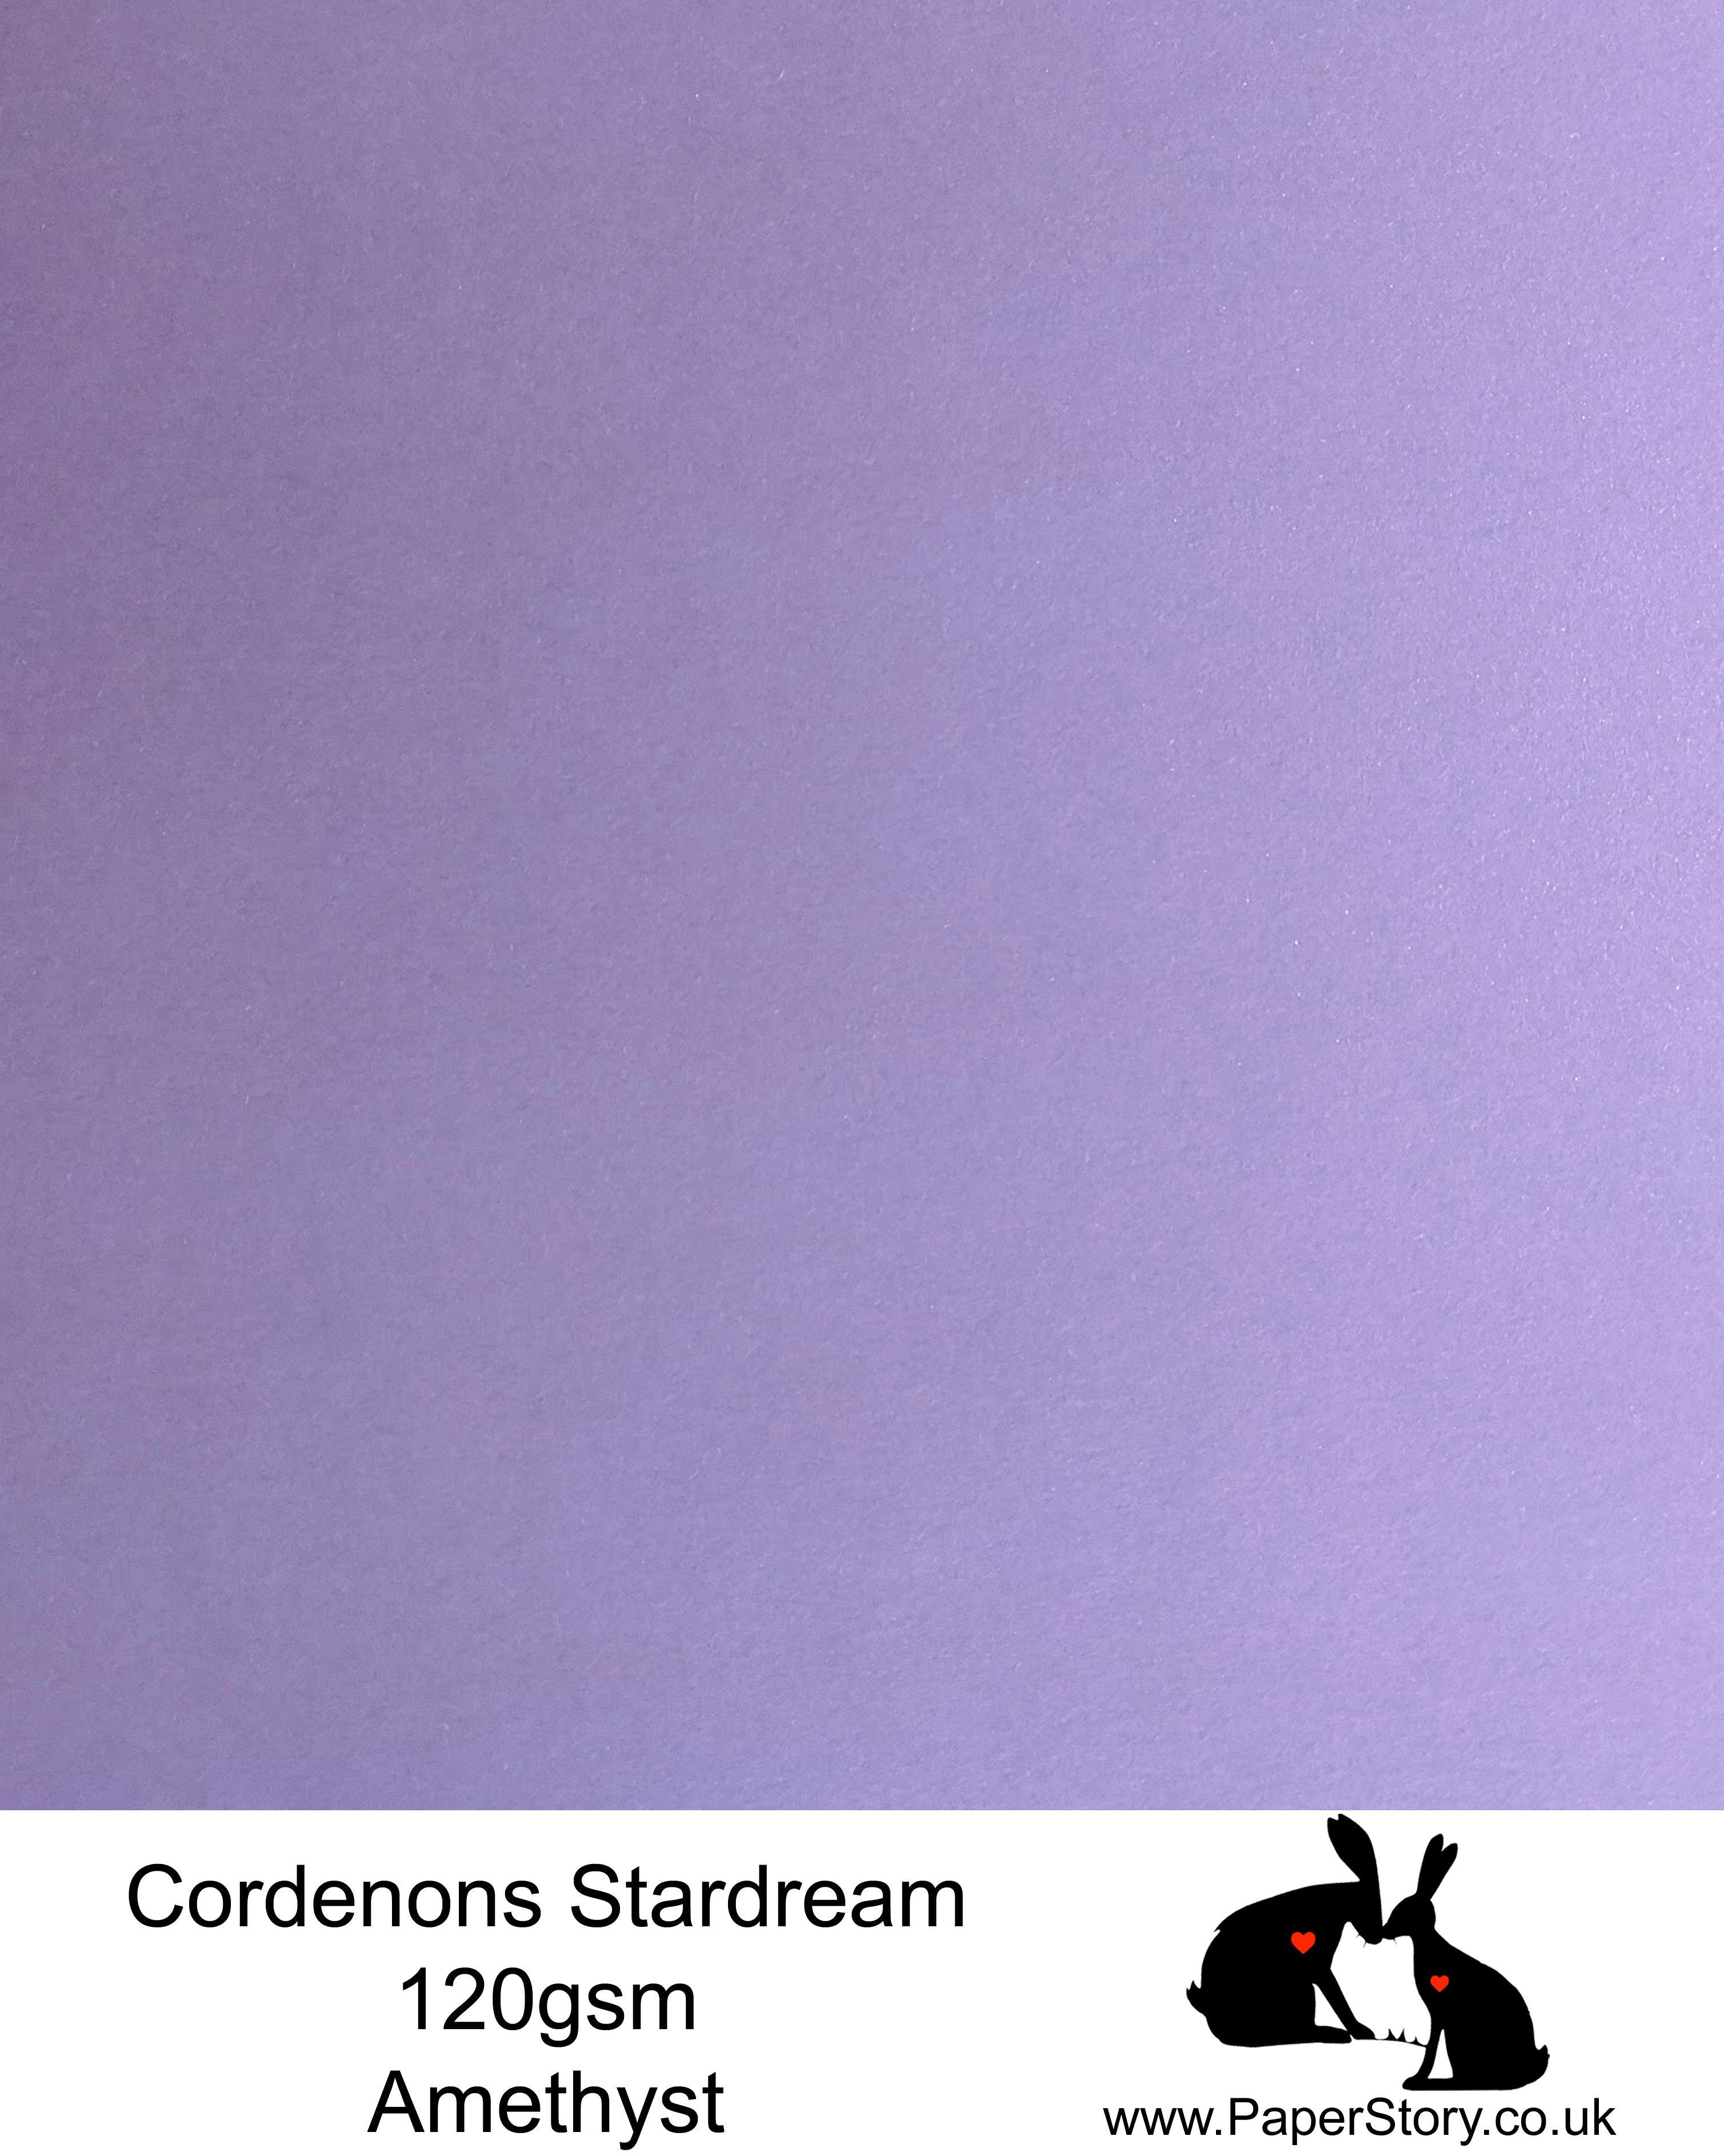 A4 Stardream 120gsm paper for Papercutting, craft, flower making  and wedding stationery. Stardream is a luxury Italian paper from Italy, it is a double sided quality Pearlescent paper with a matching colour core. FSC Certified, acid free, archival and PH Neutral